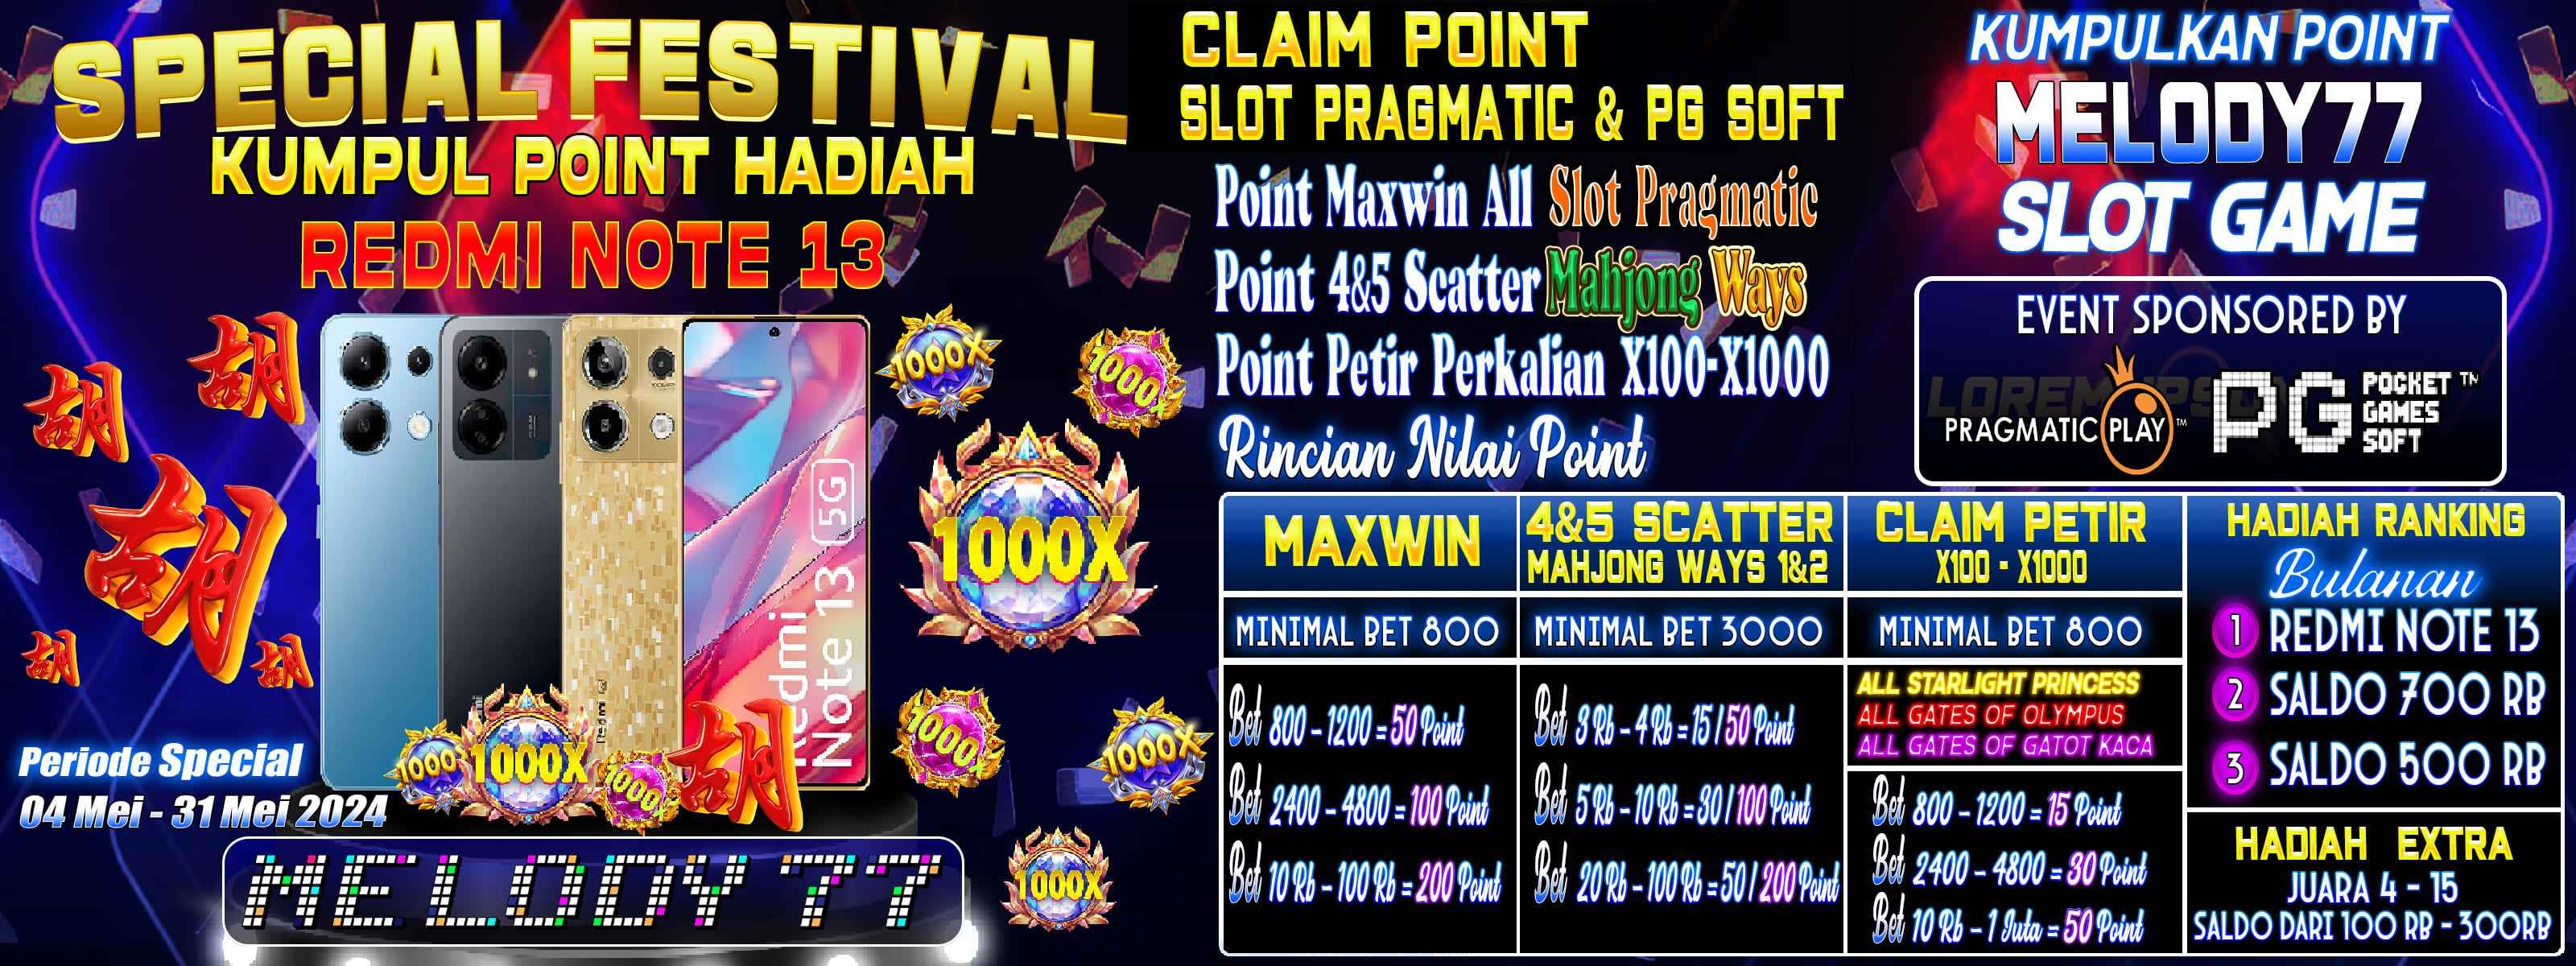 SPECIAL EVEN CLAIM POINT MELODY77